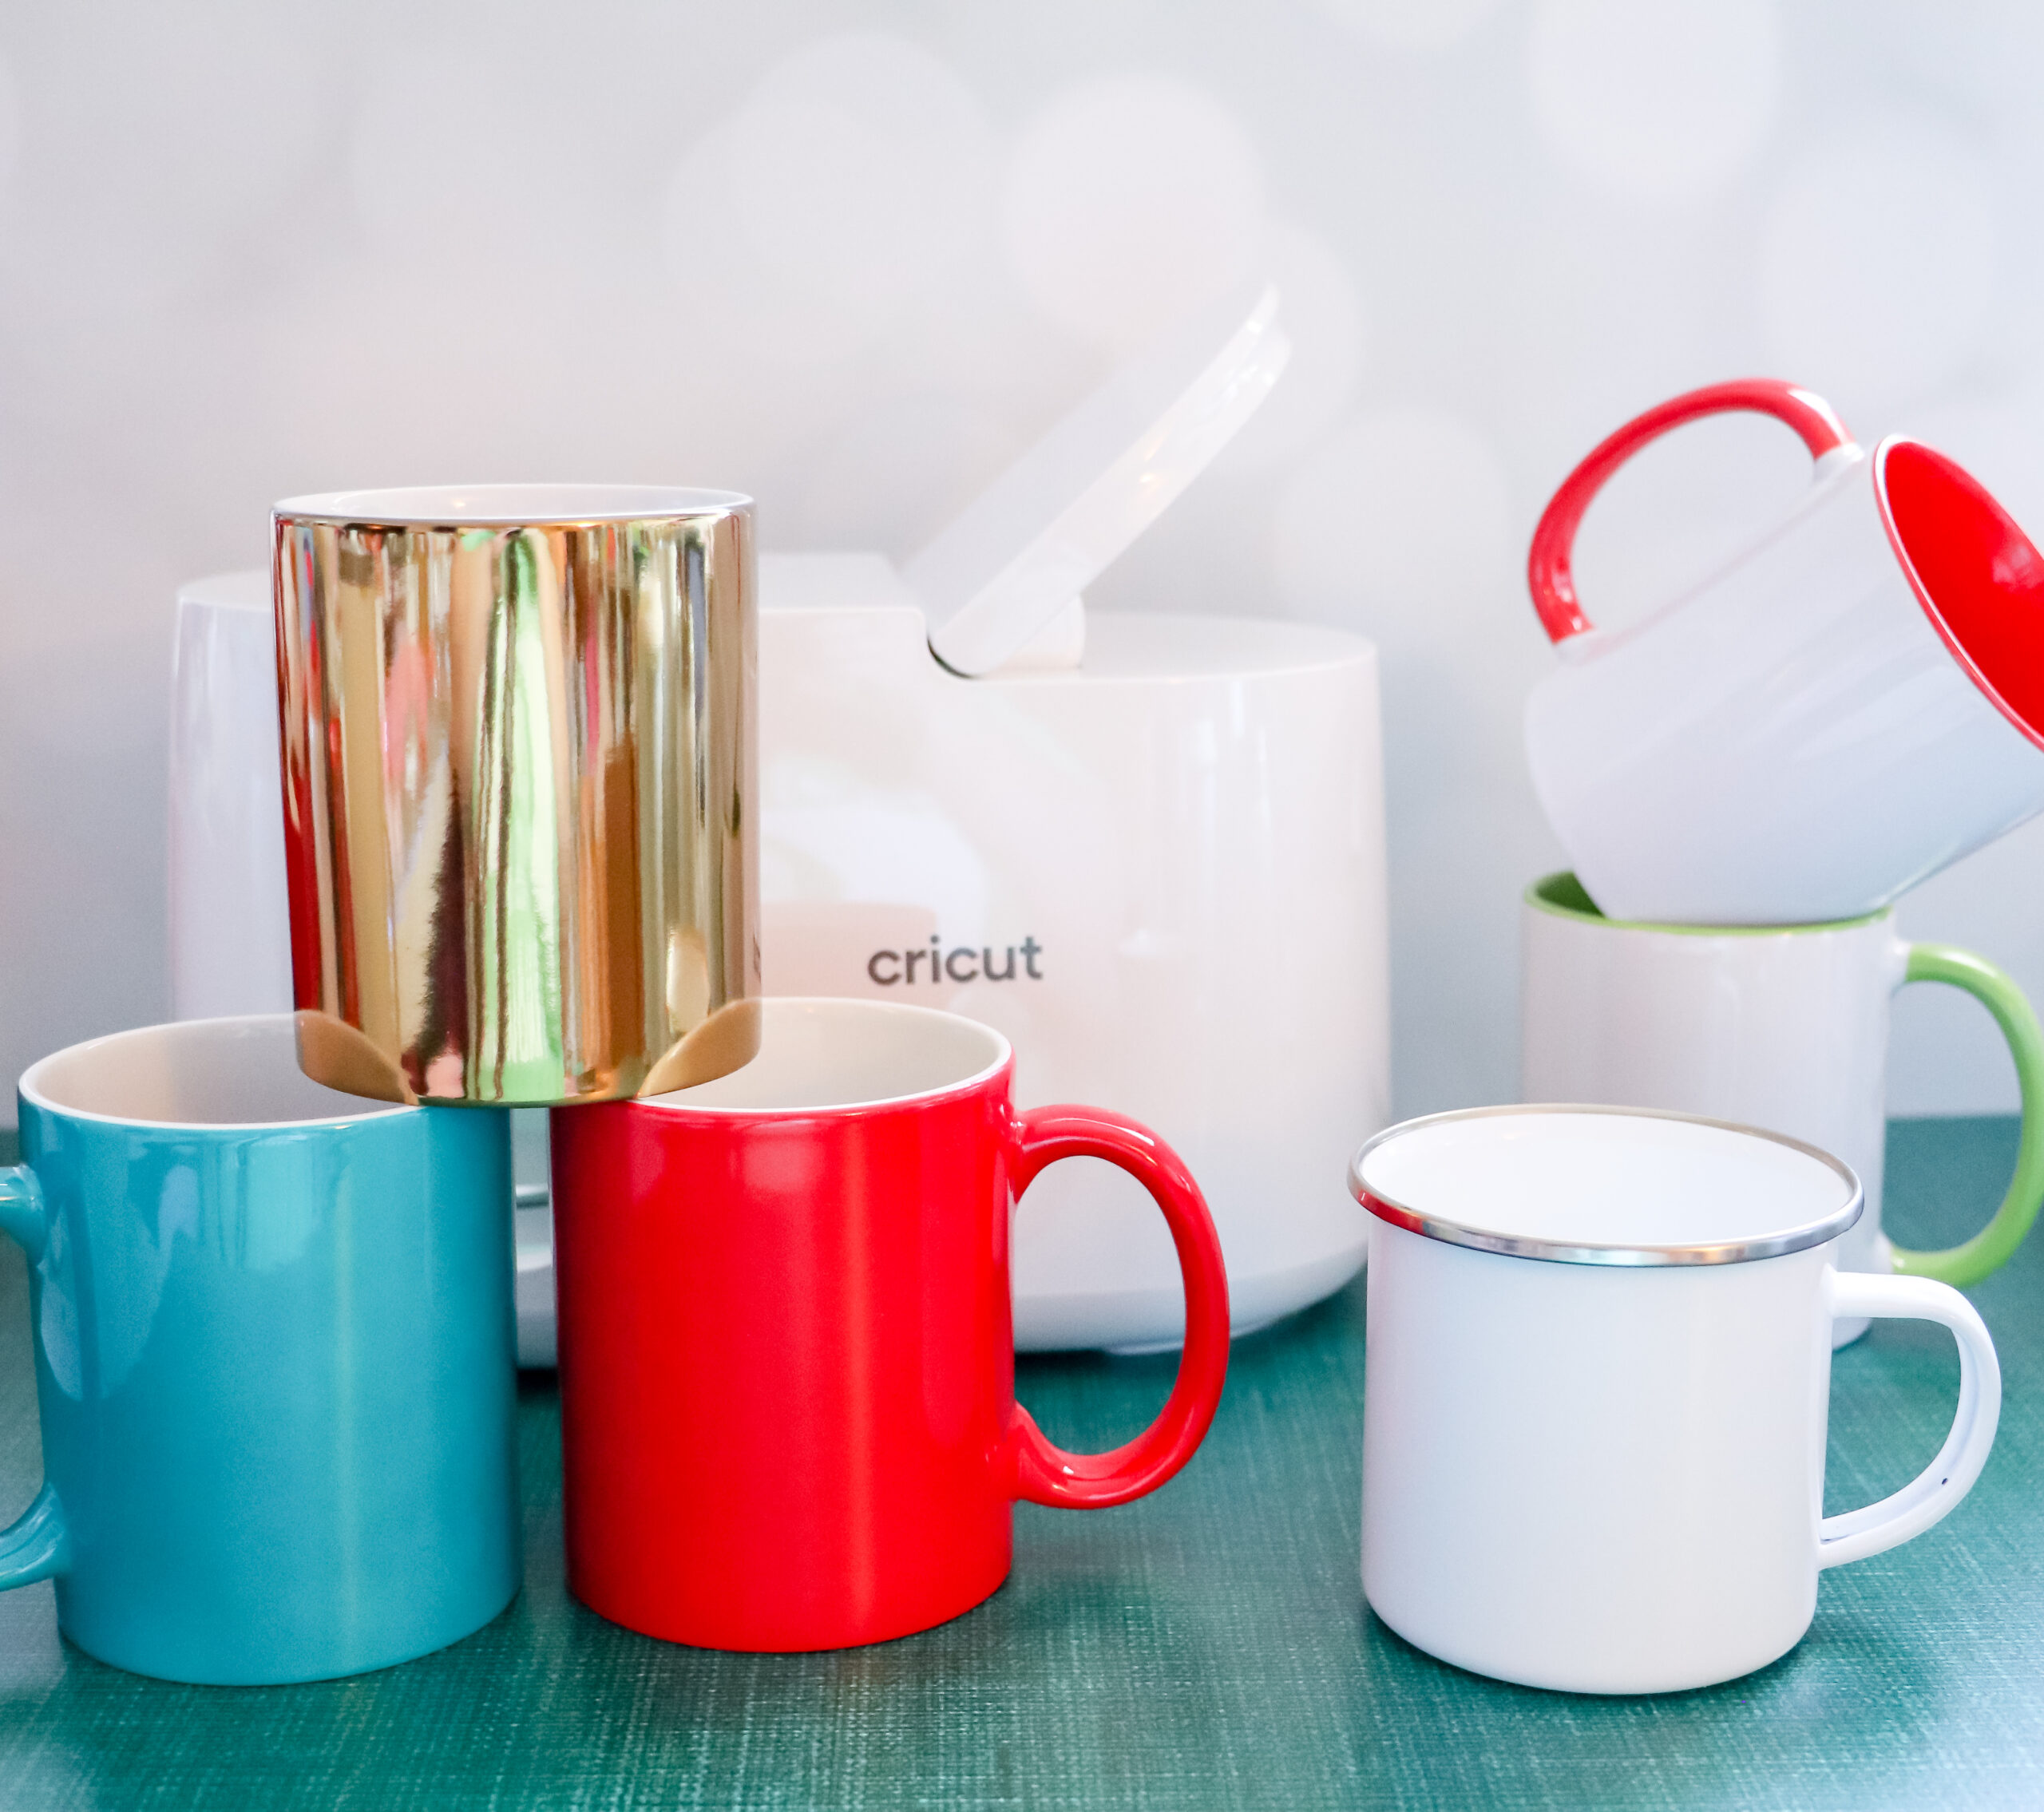 Where to buy Sublimation Mug Blanks » The Denver Housewife